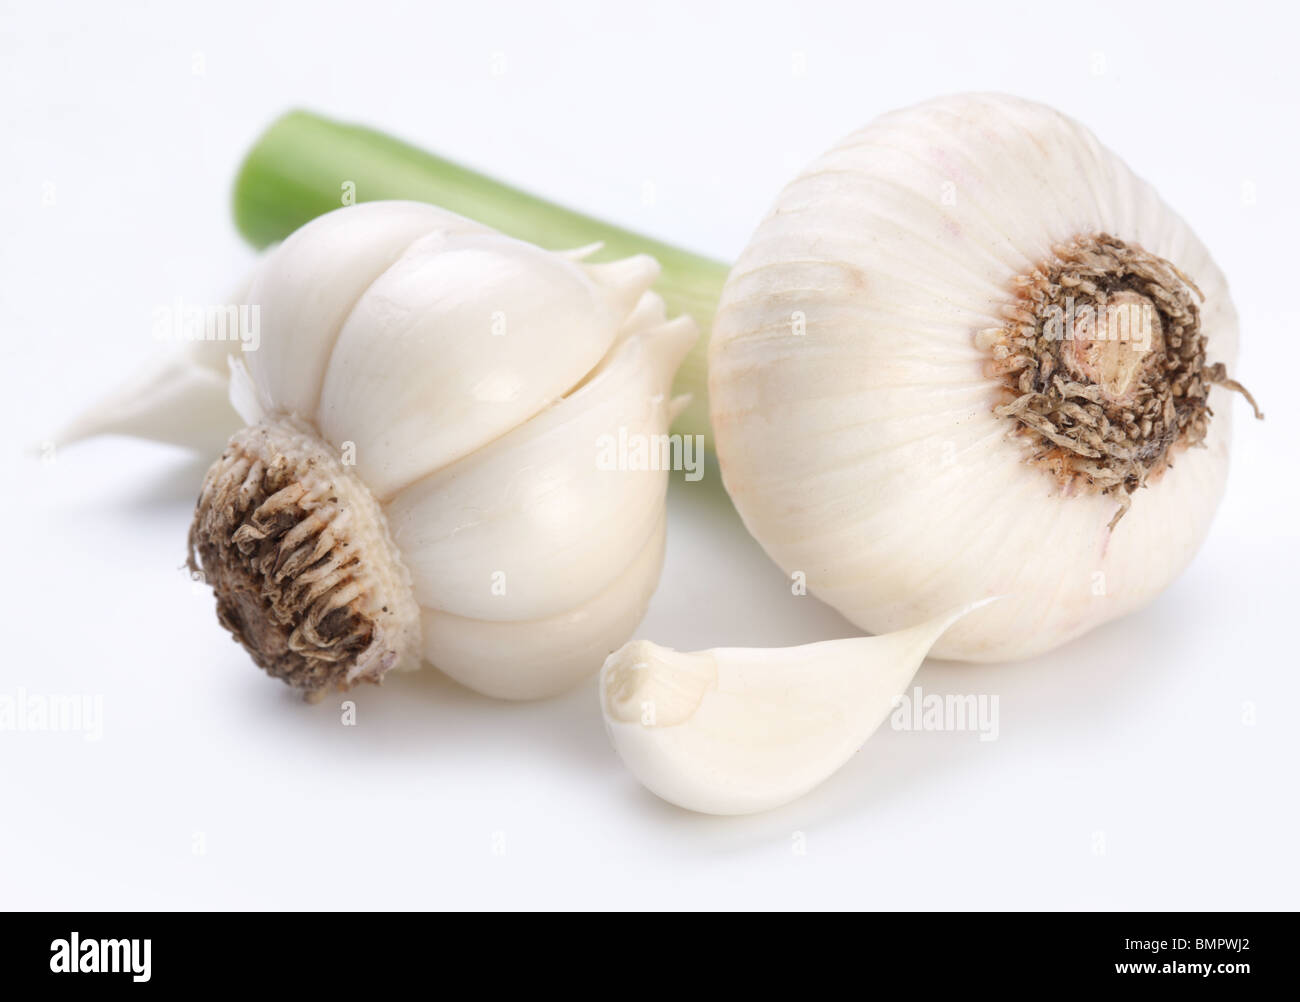 young garlic on a white background Stock Photo